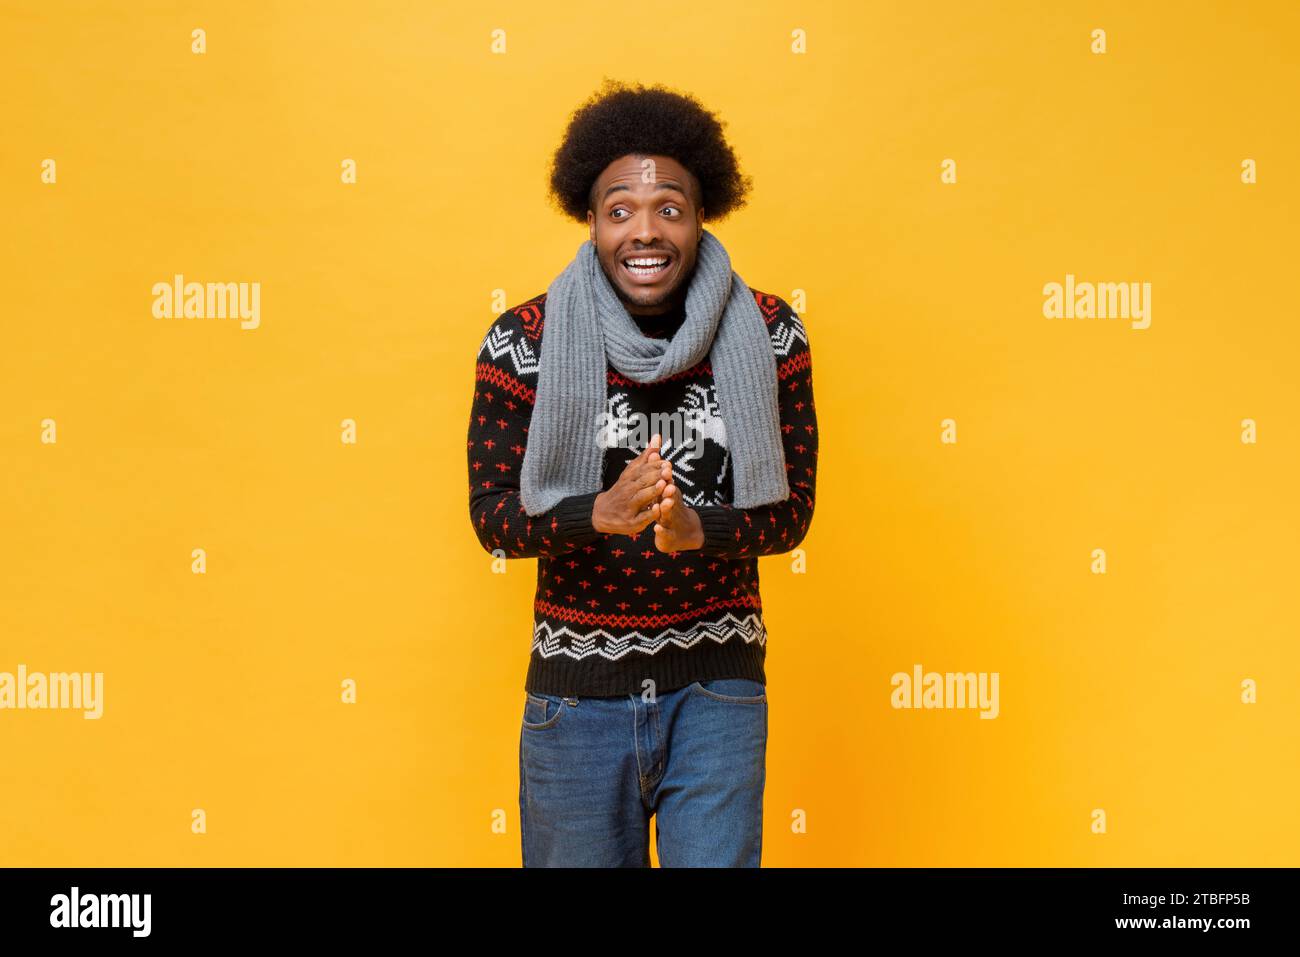 Surprised excited African American man wearing Christmas sweater and scarf, festive studio shot in yellow color isolated background Stock Photo